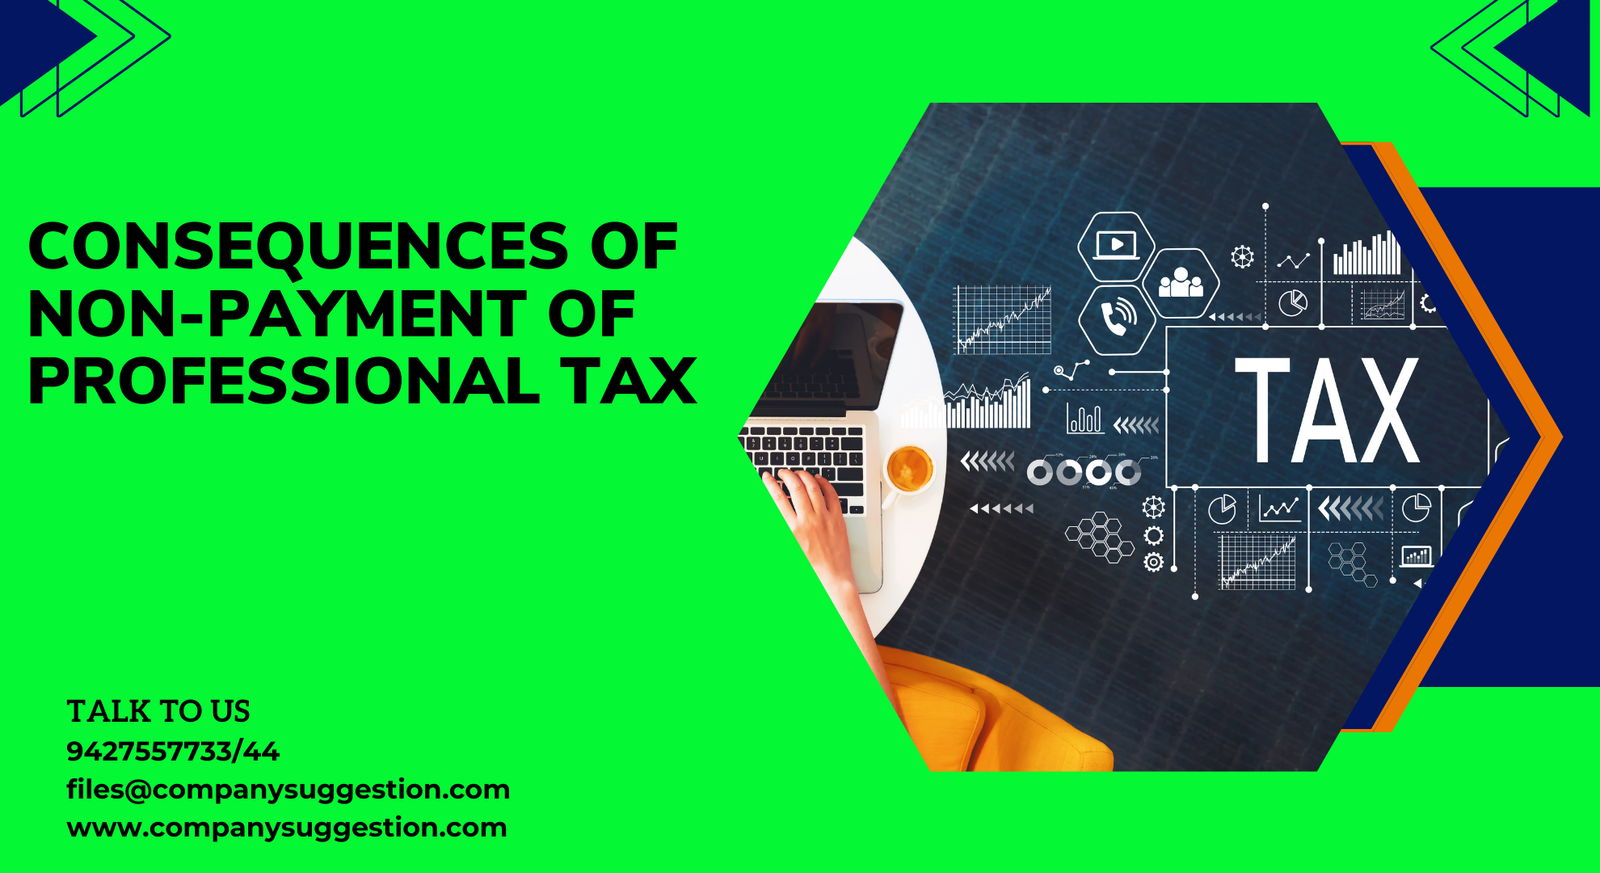 CONSEQUENCES OF NON-PAYMENT OF PROFESSIONAL TAX